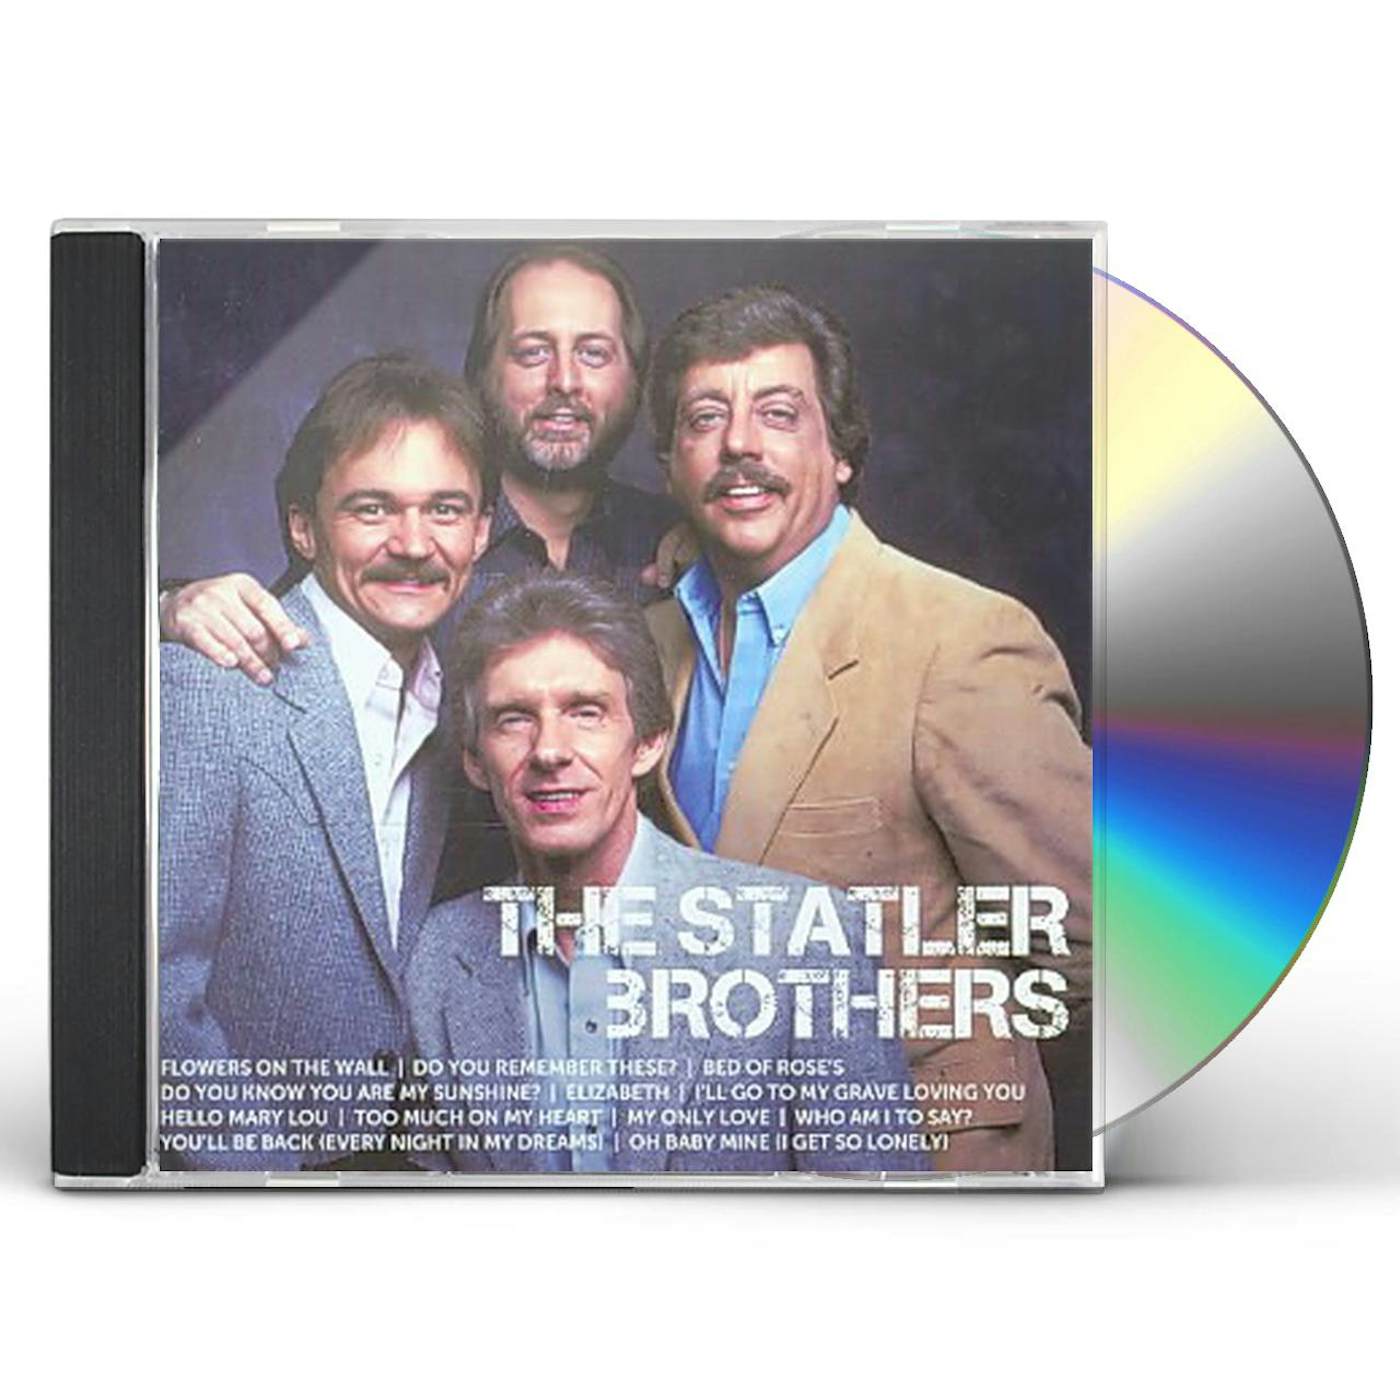 The Statler Brothers ICON CD